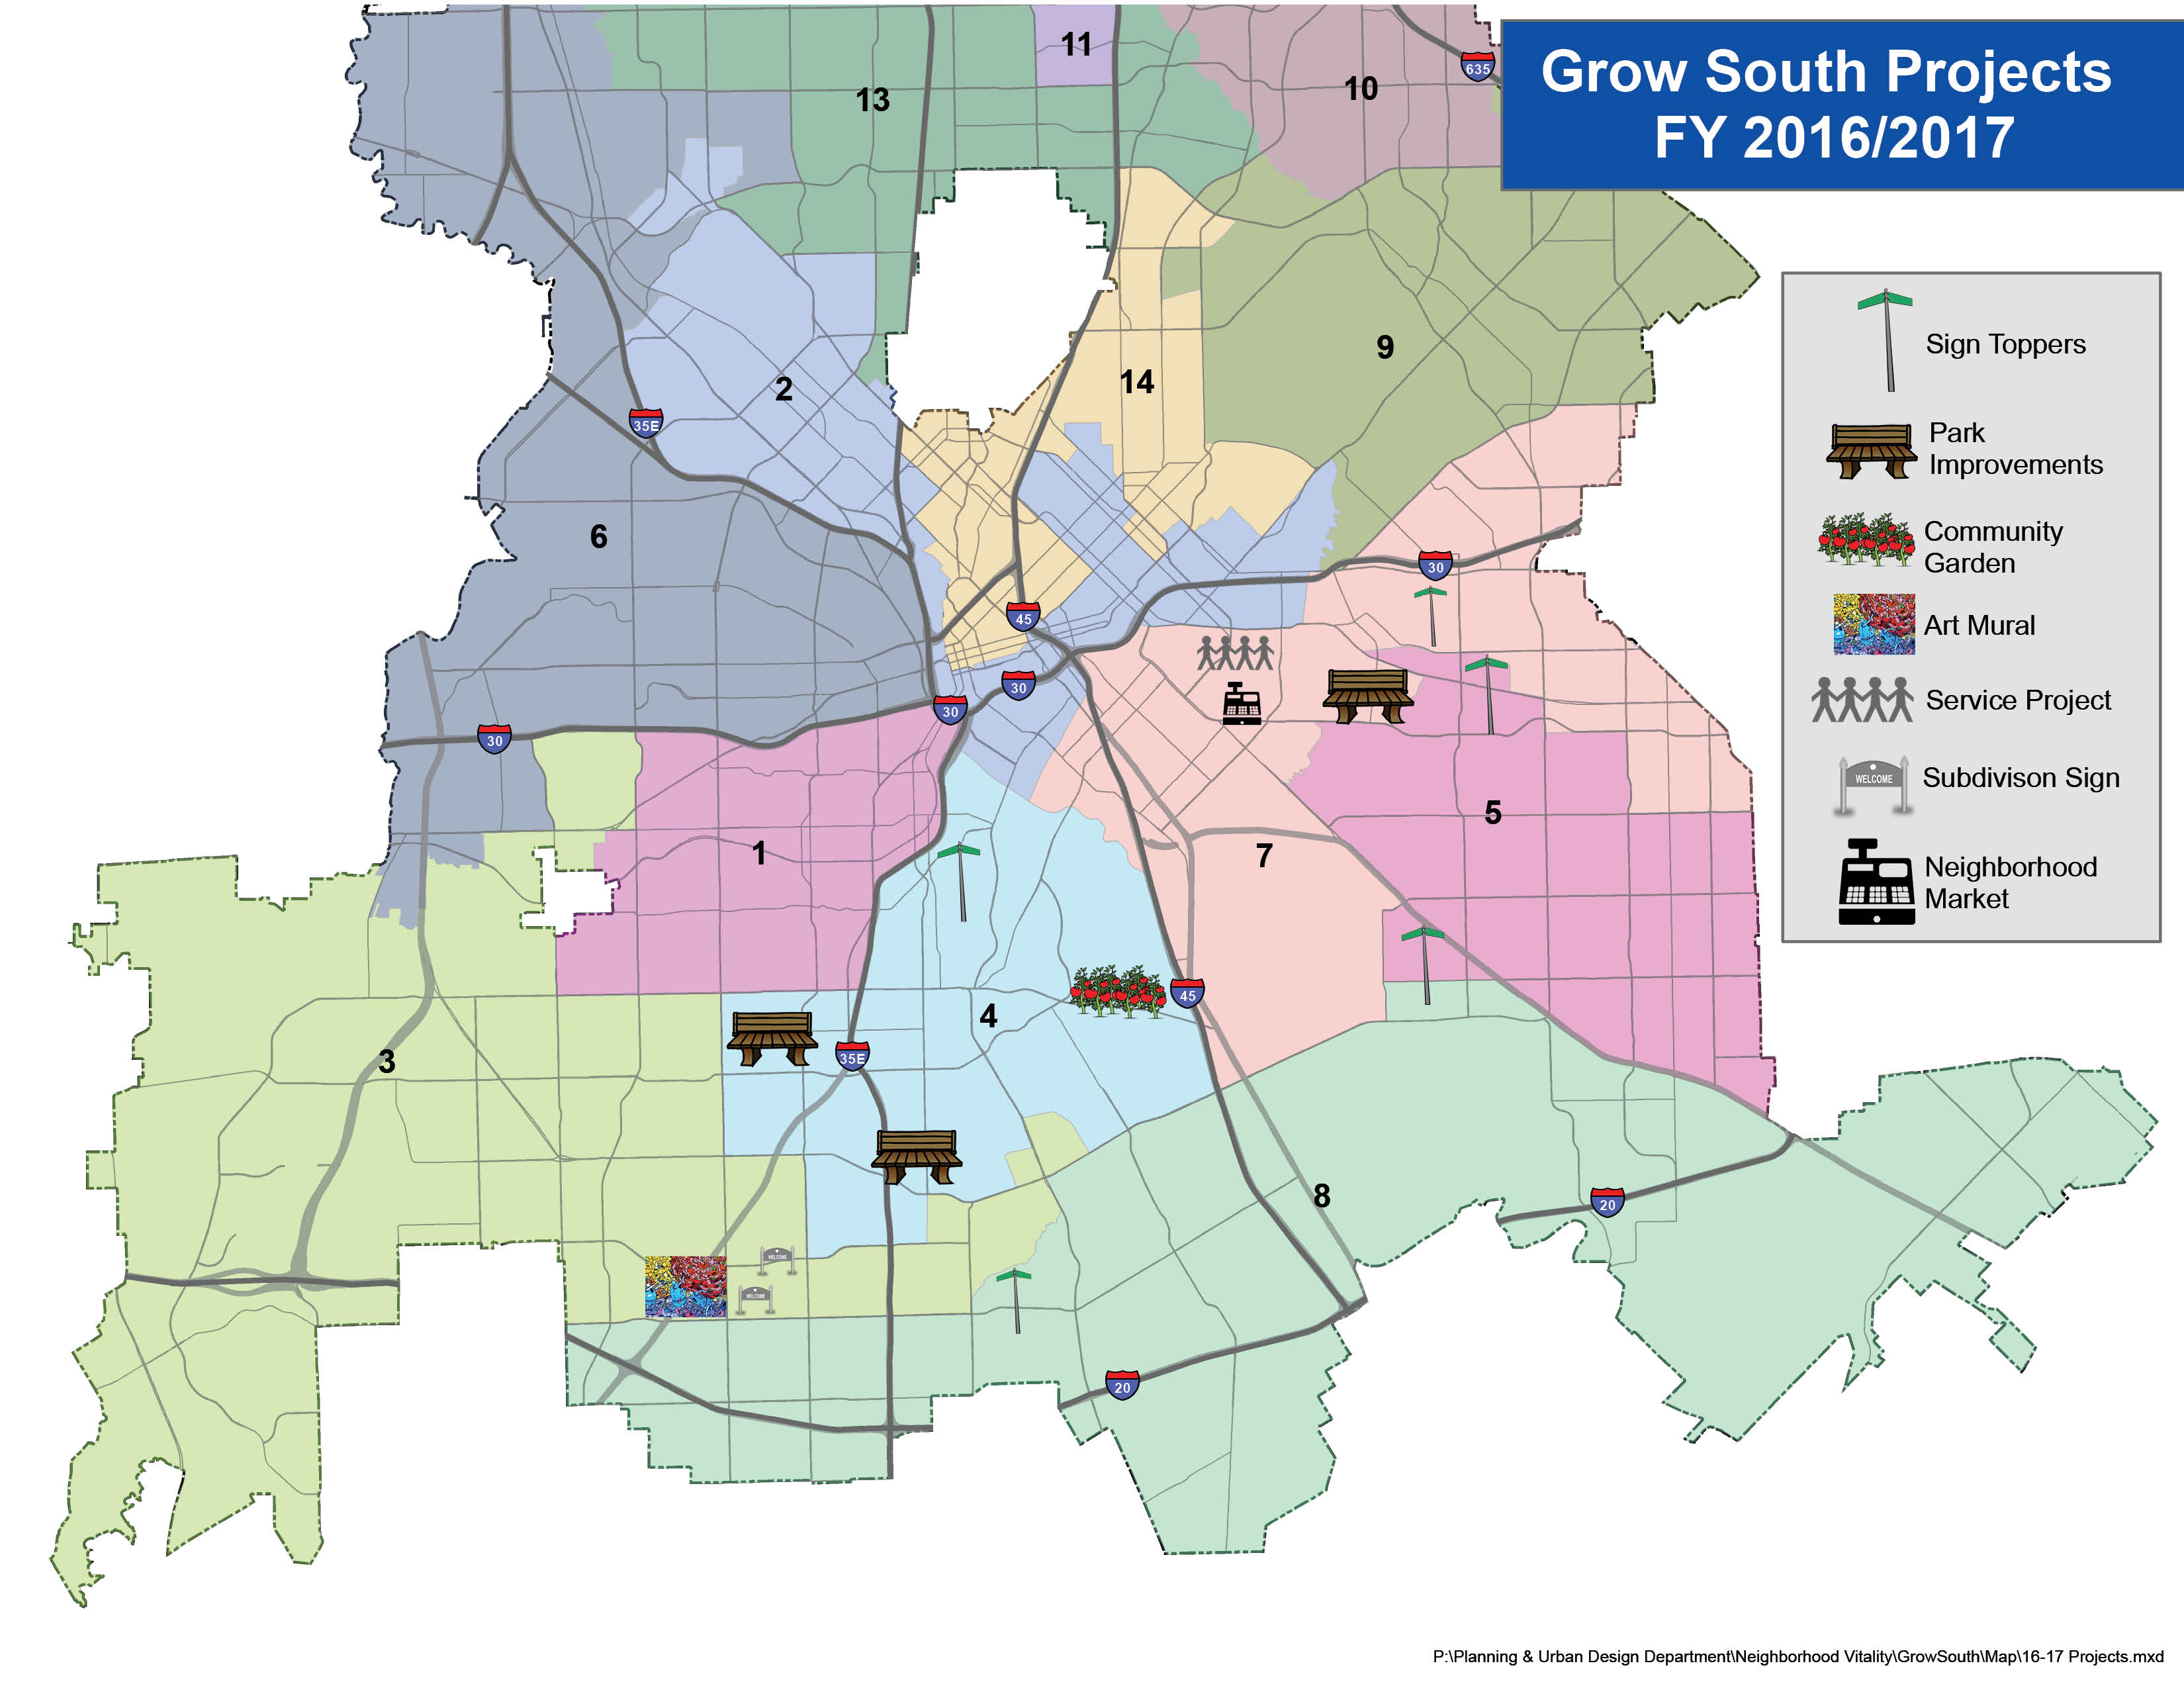 GrowSouthProjects-FY1617.jpg